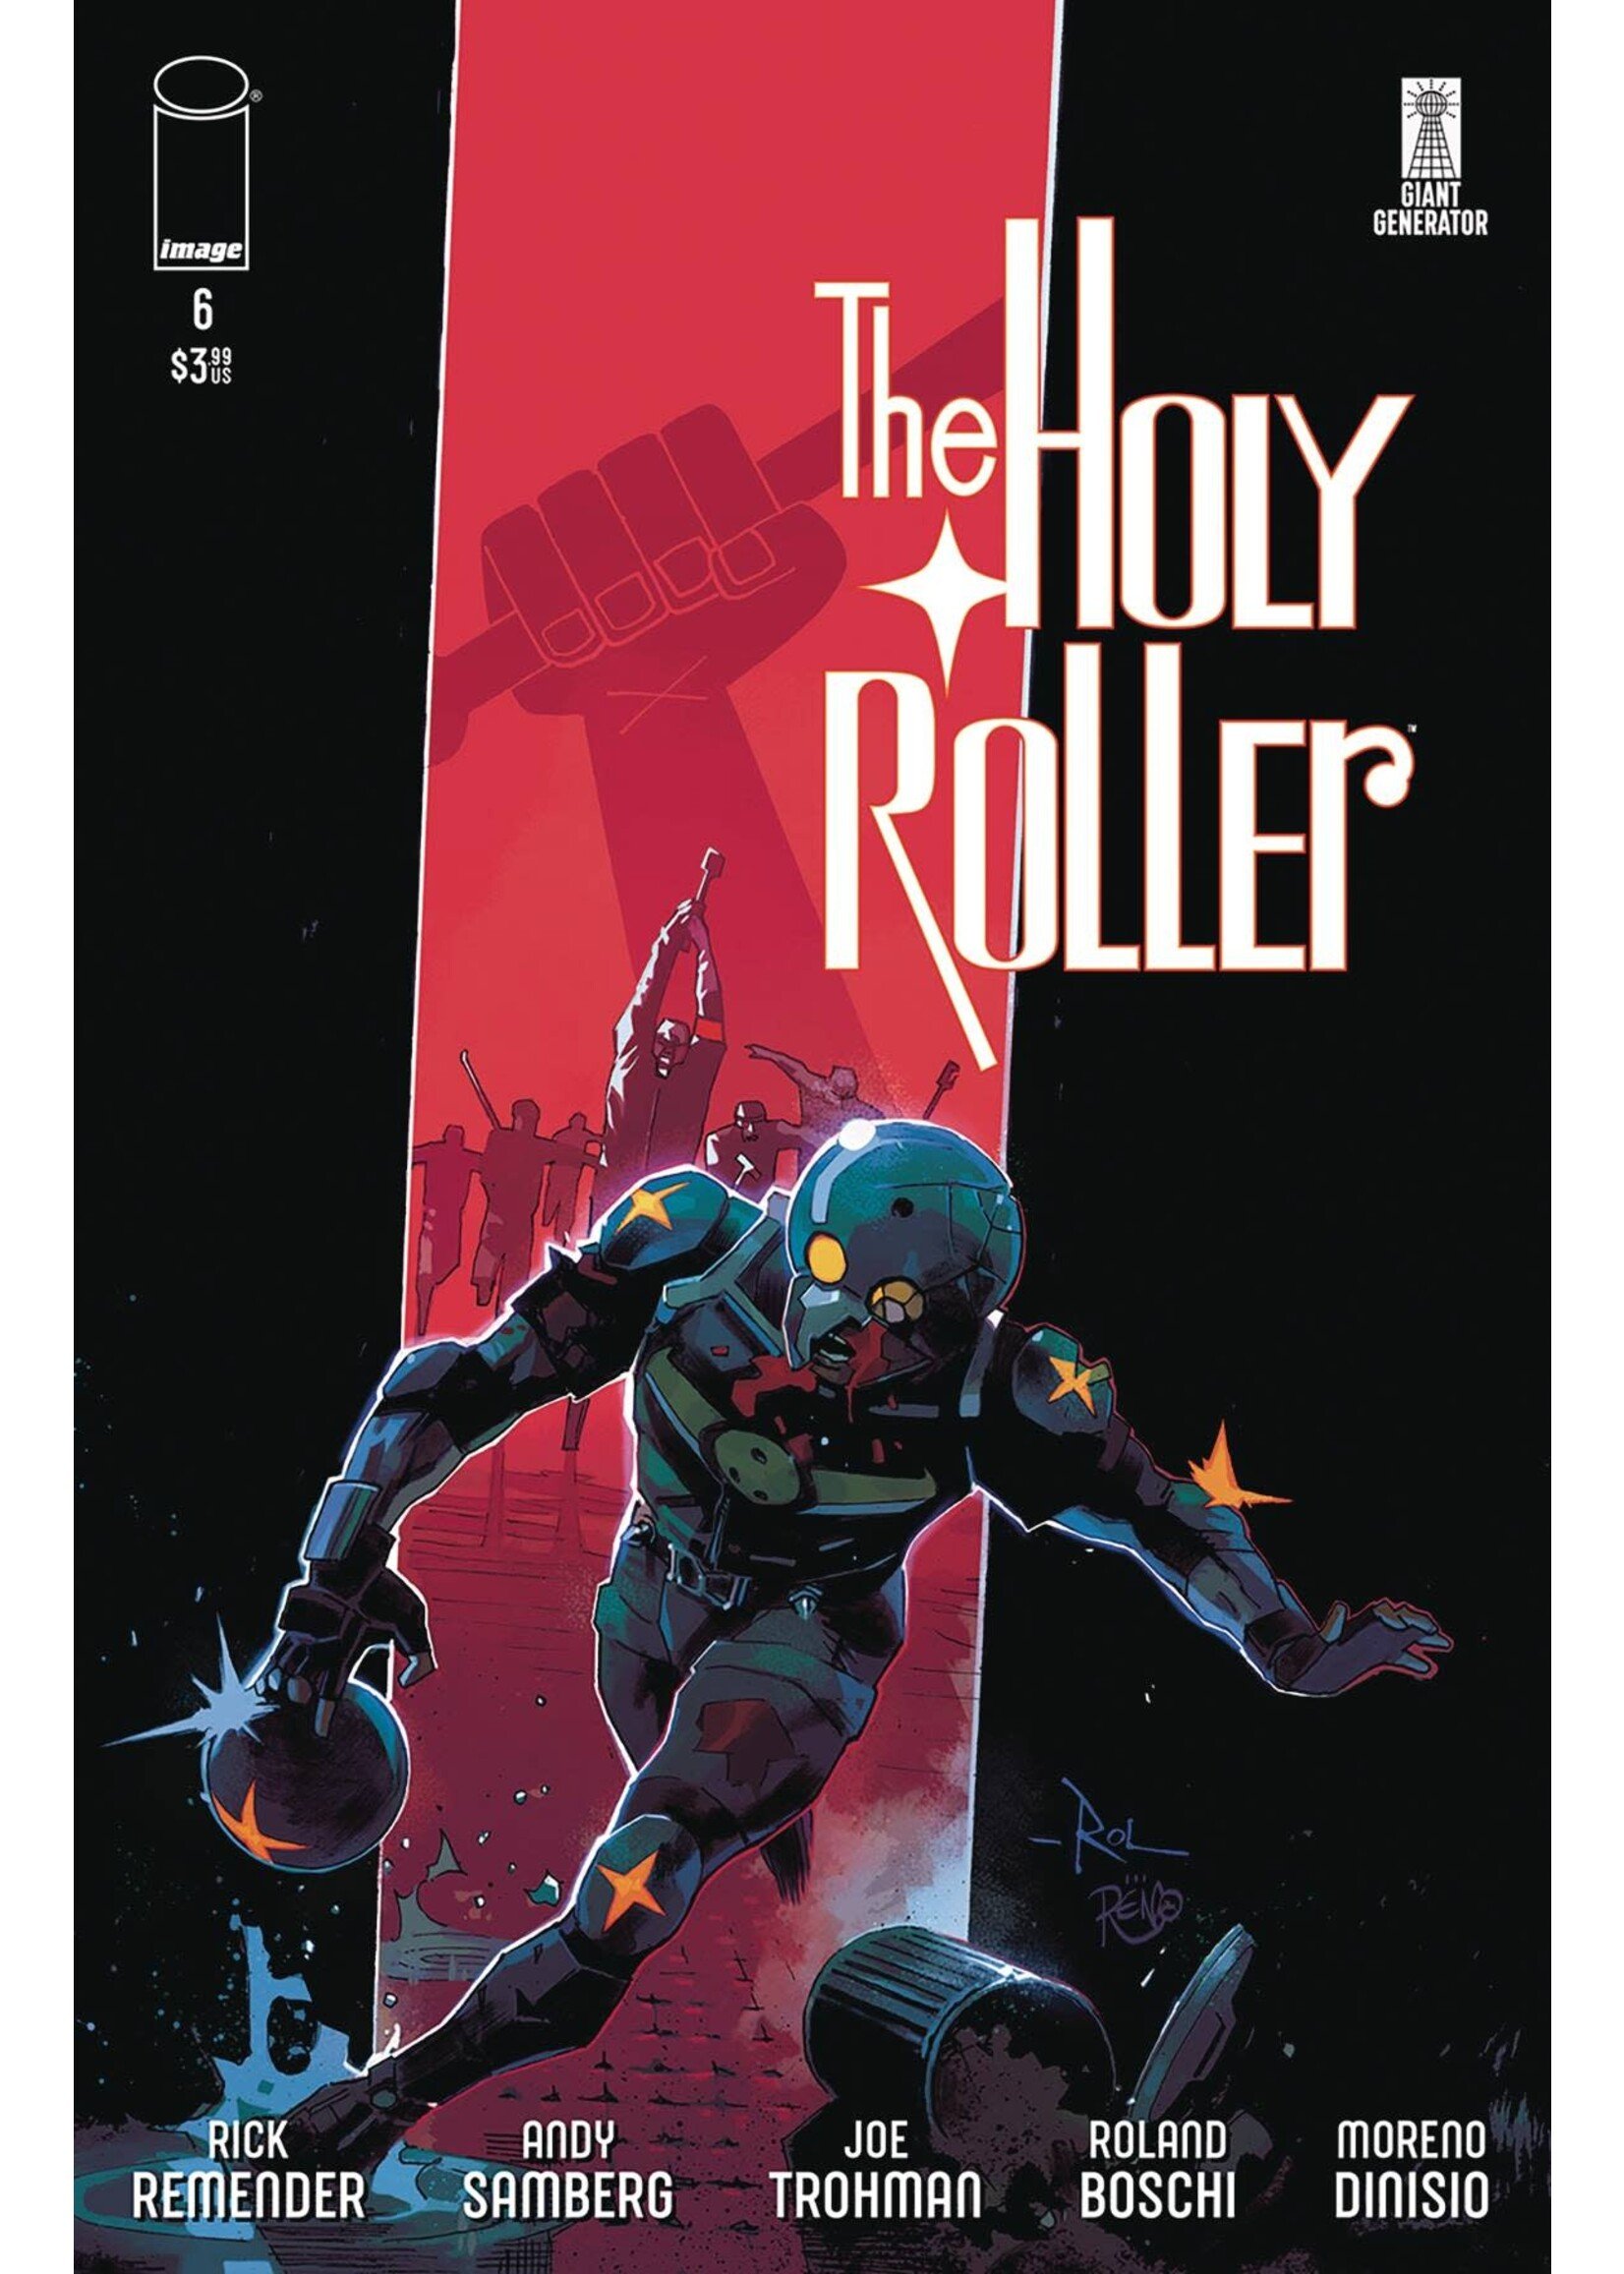 IMAGE COMICS HOLY ROLLER #6 (OF 9) CVR A BOSCHI & DINISIO